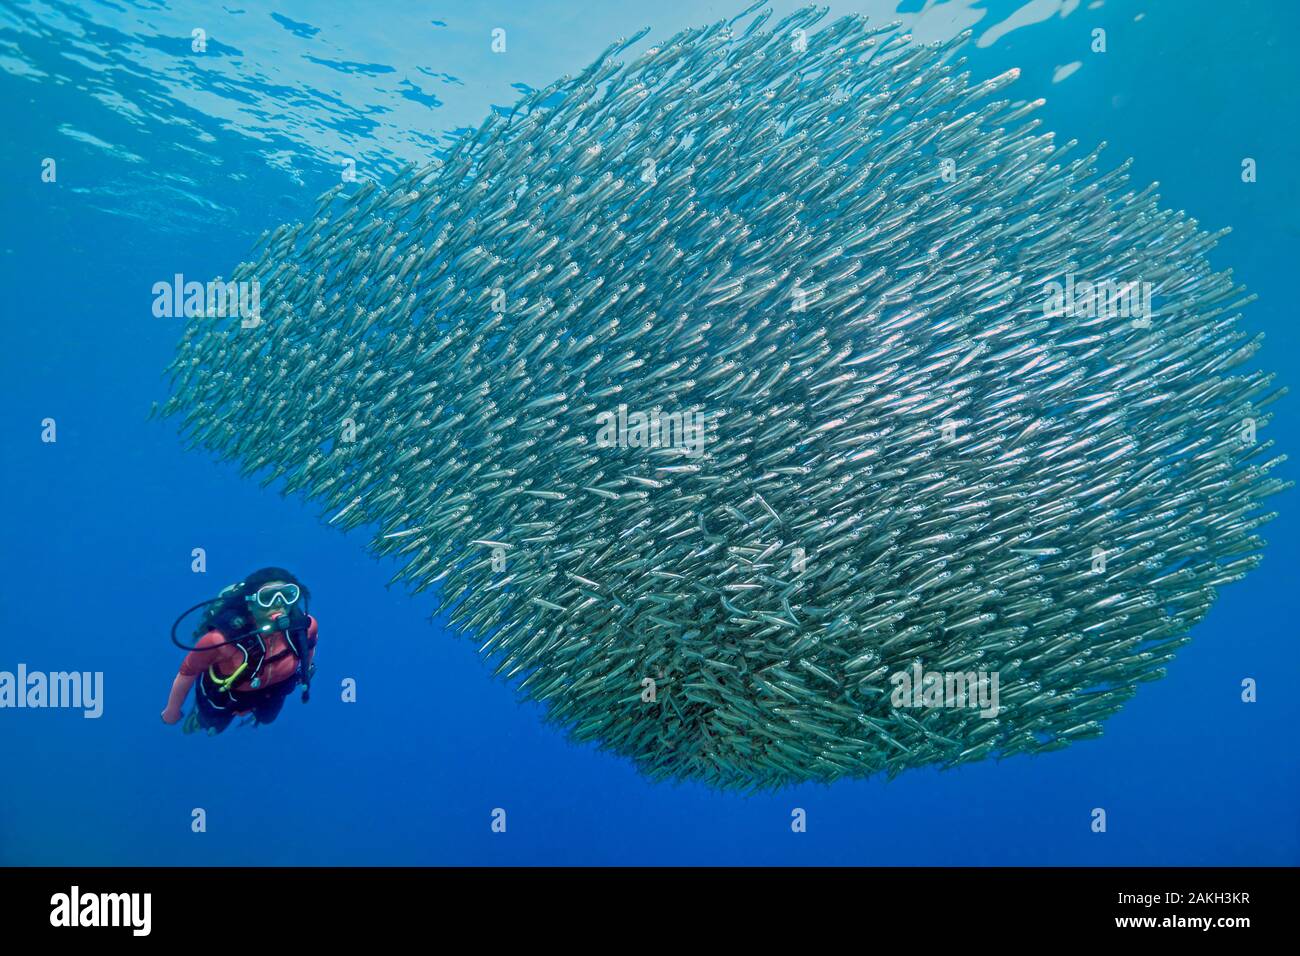 Egypt, Red Sea, a school of sand smelt fish (Atherina sp.) Stock Photo